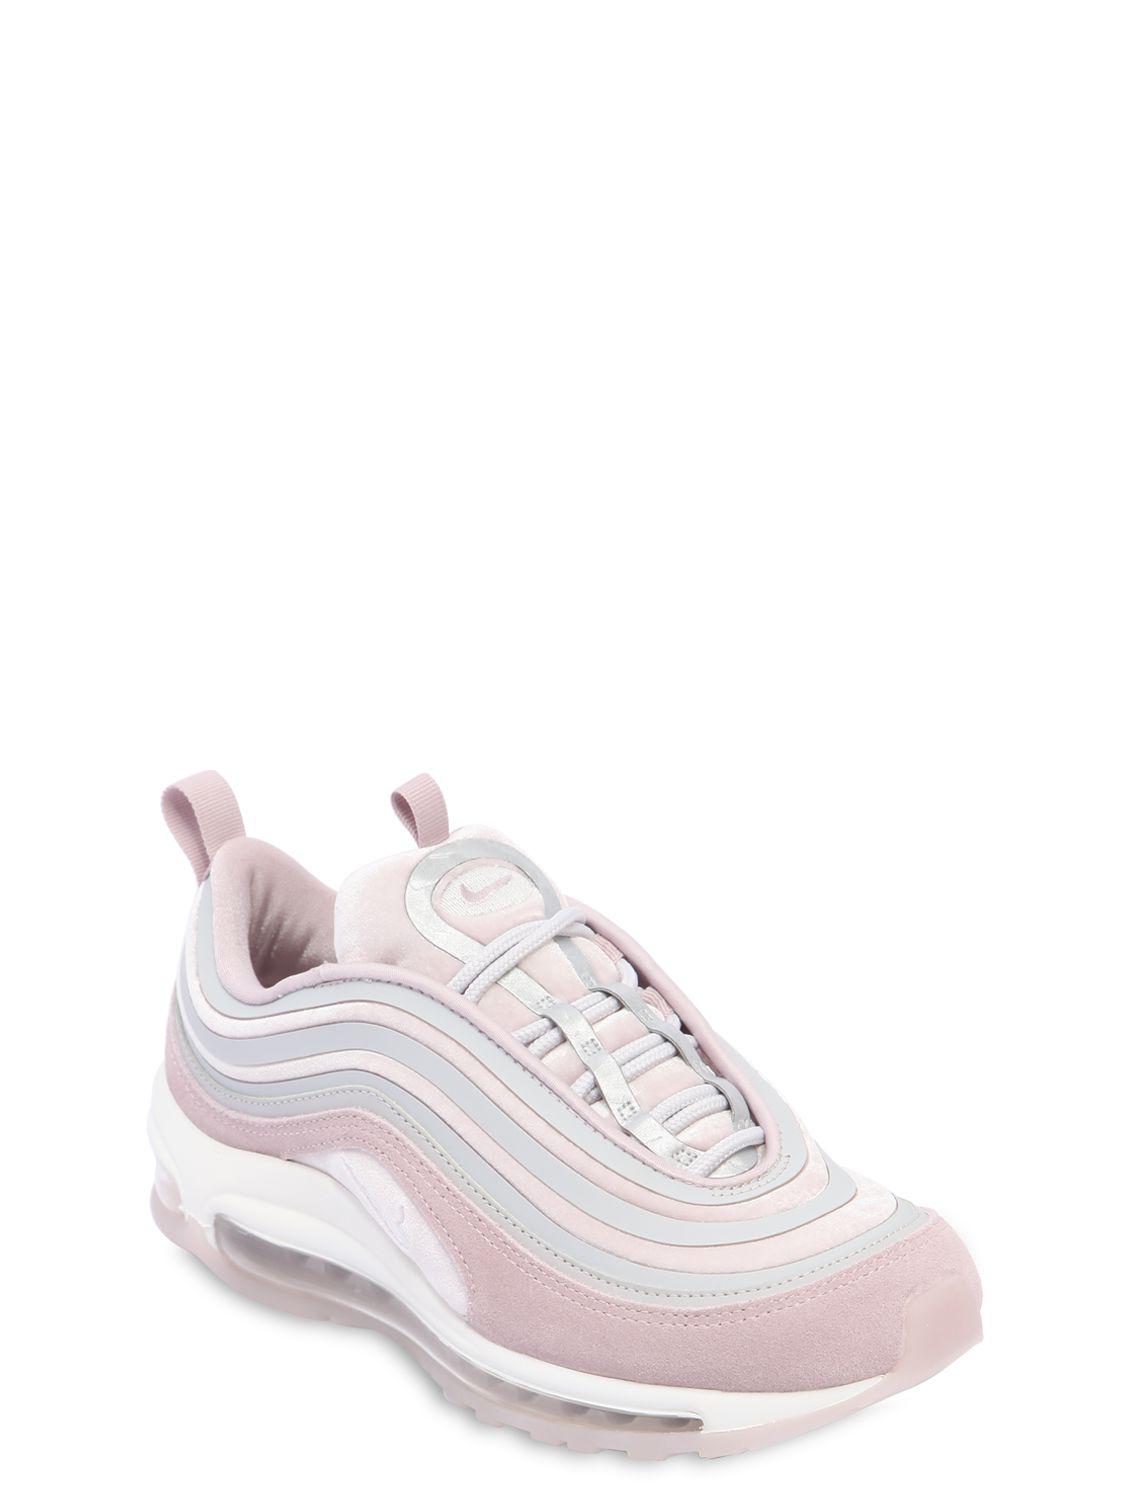 Nike Suede Air Max 97 Ultra Lux Sneakers in Light Pink (Pink) - Lyst